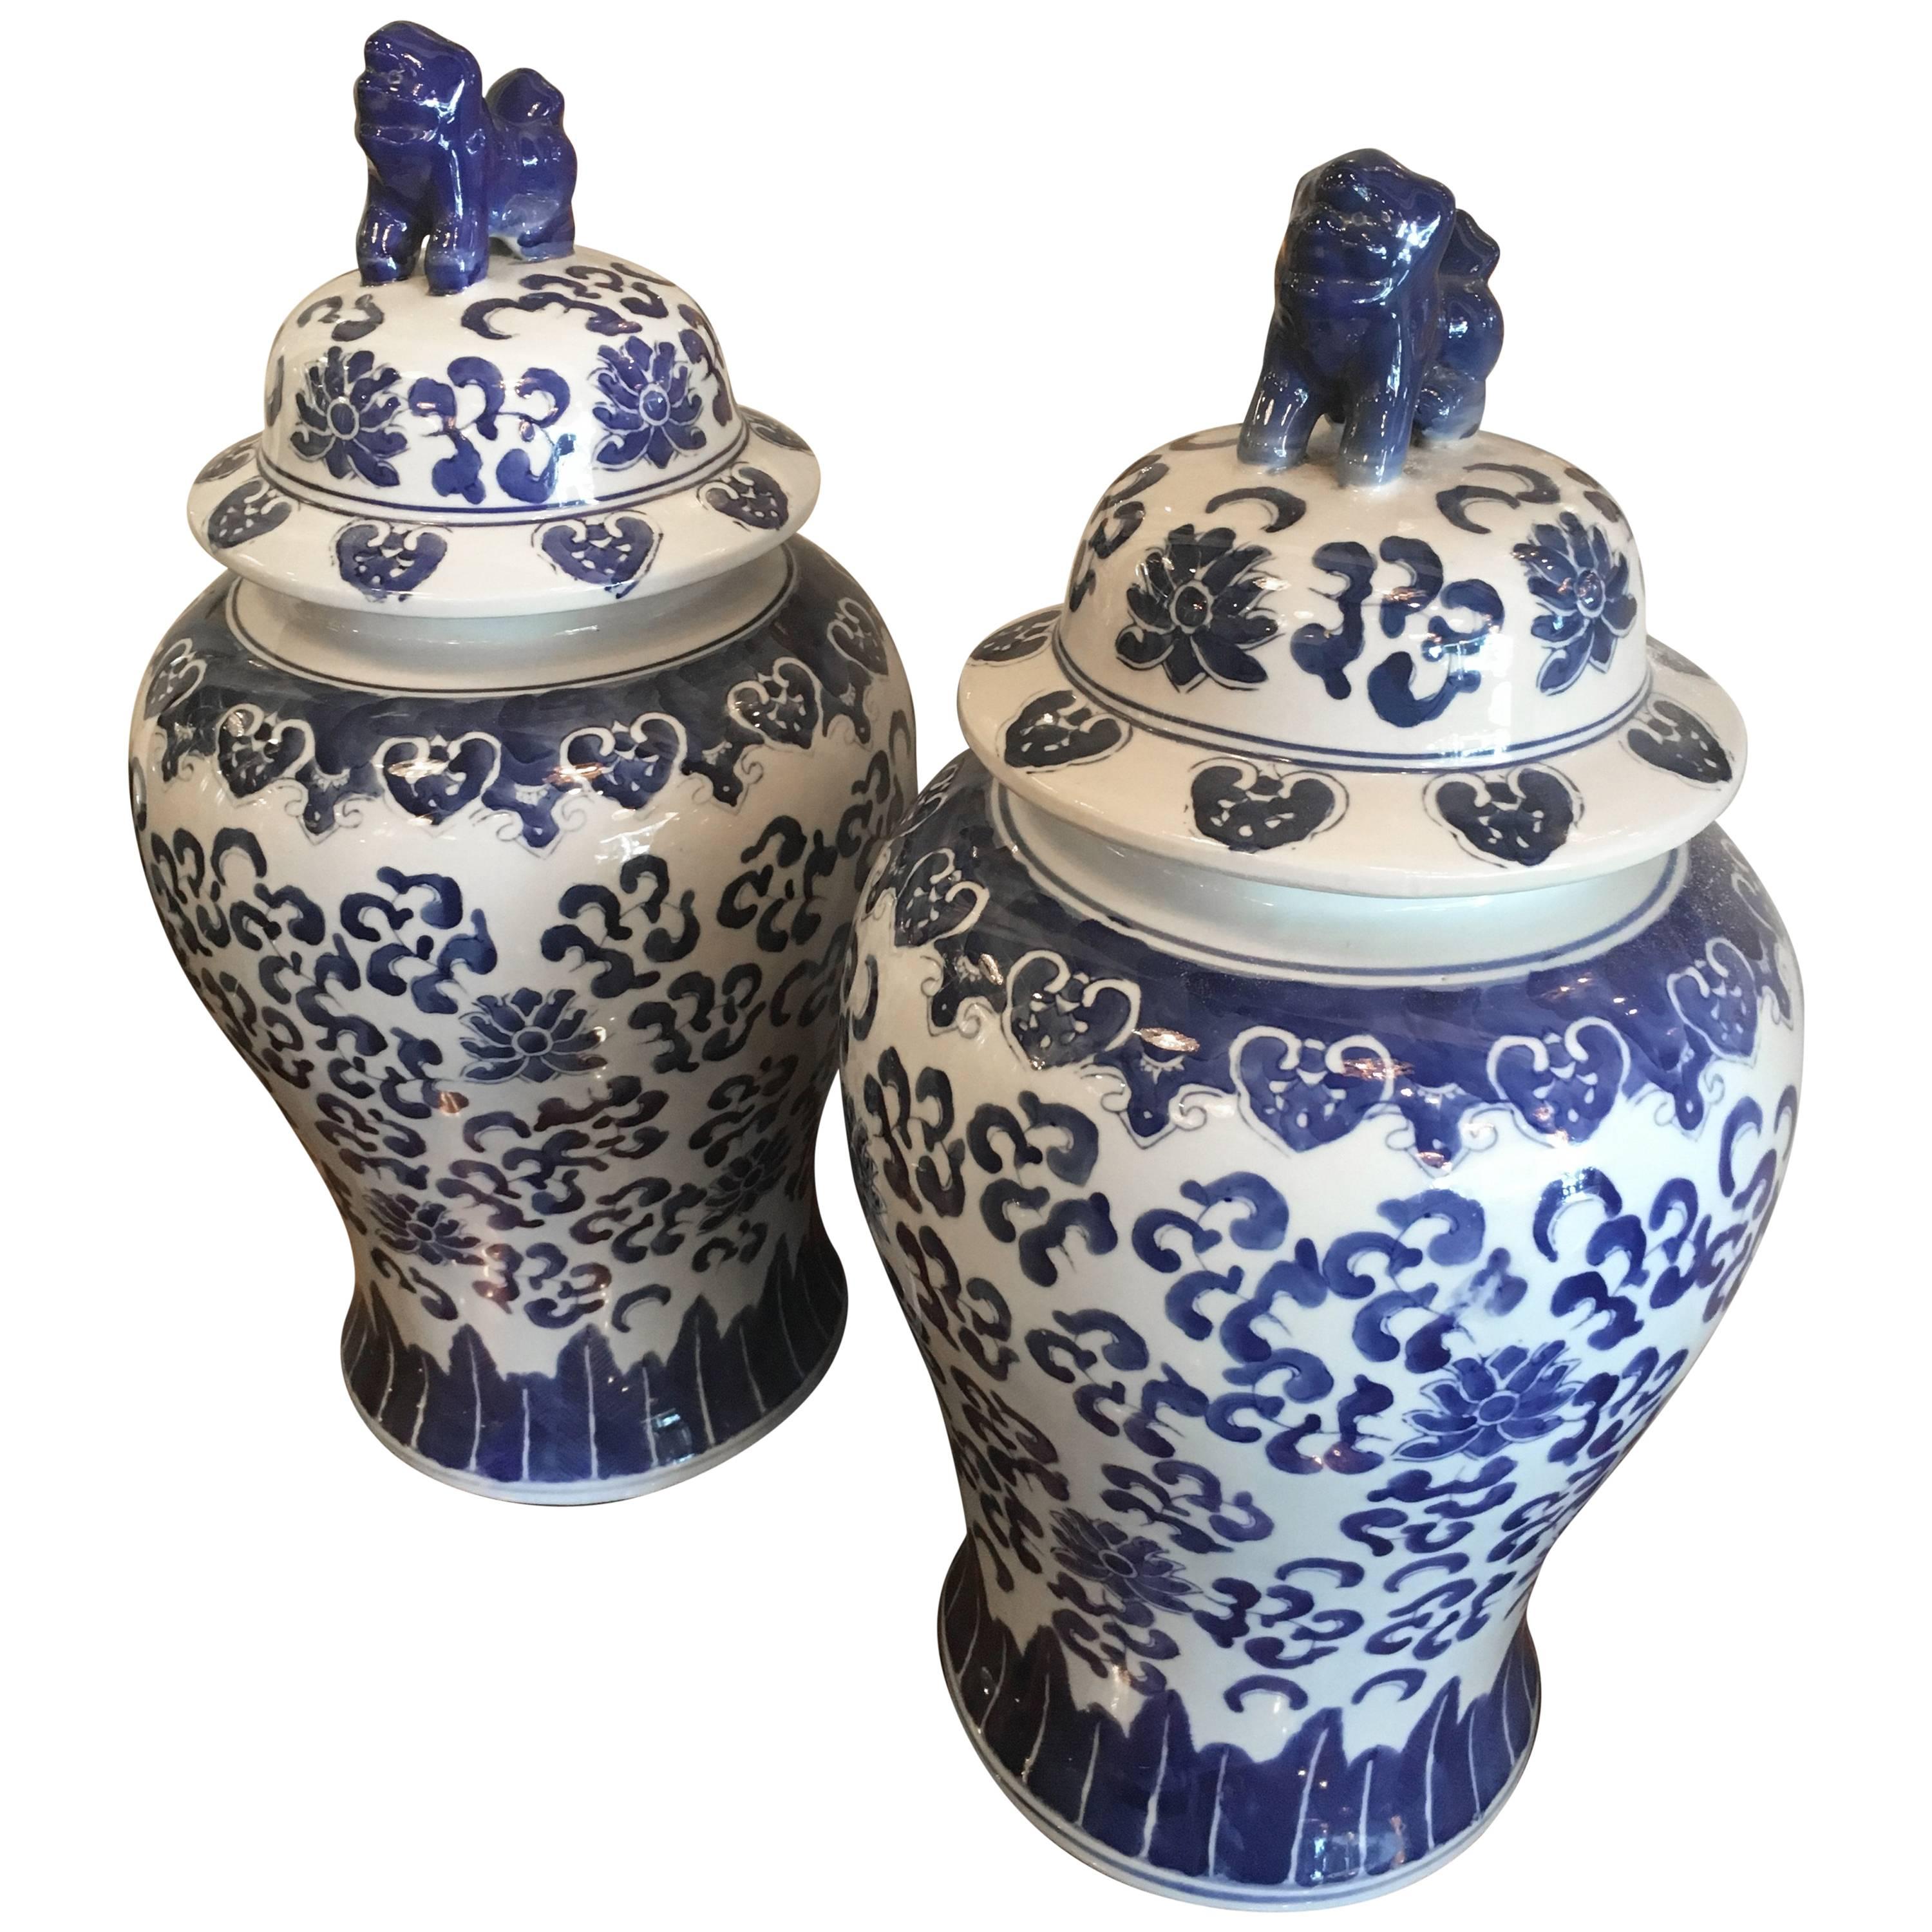 Foo Dogs Blue and White Ginger Jars Pair Vintage Large Urns Palm Beach Oriental